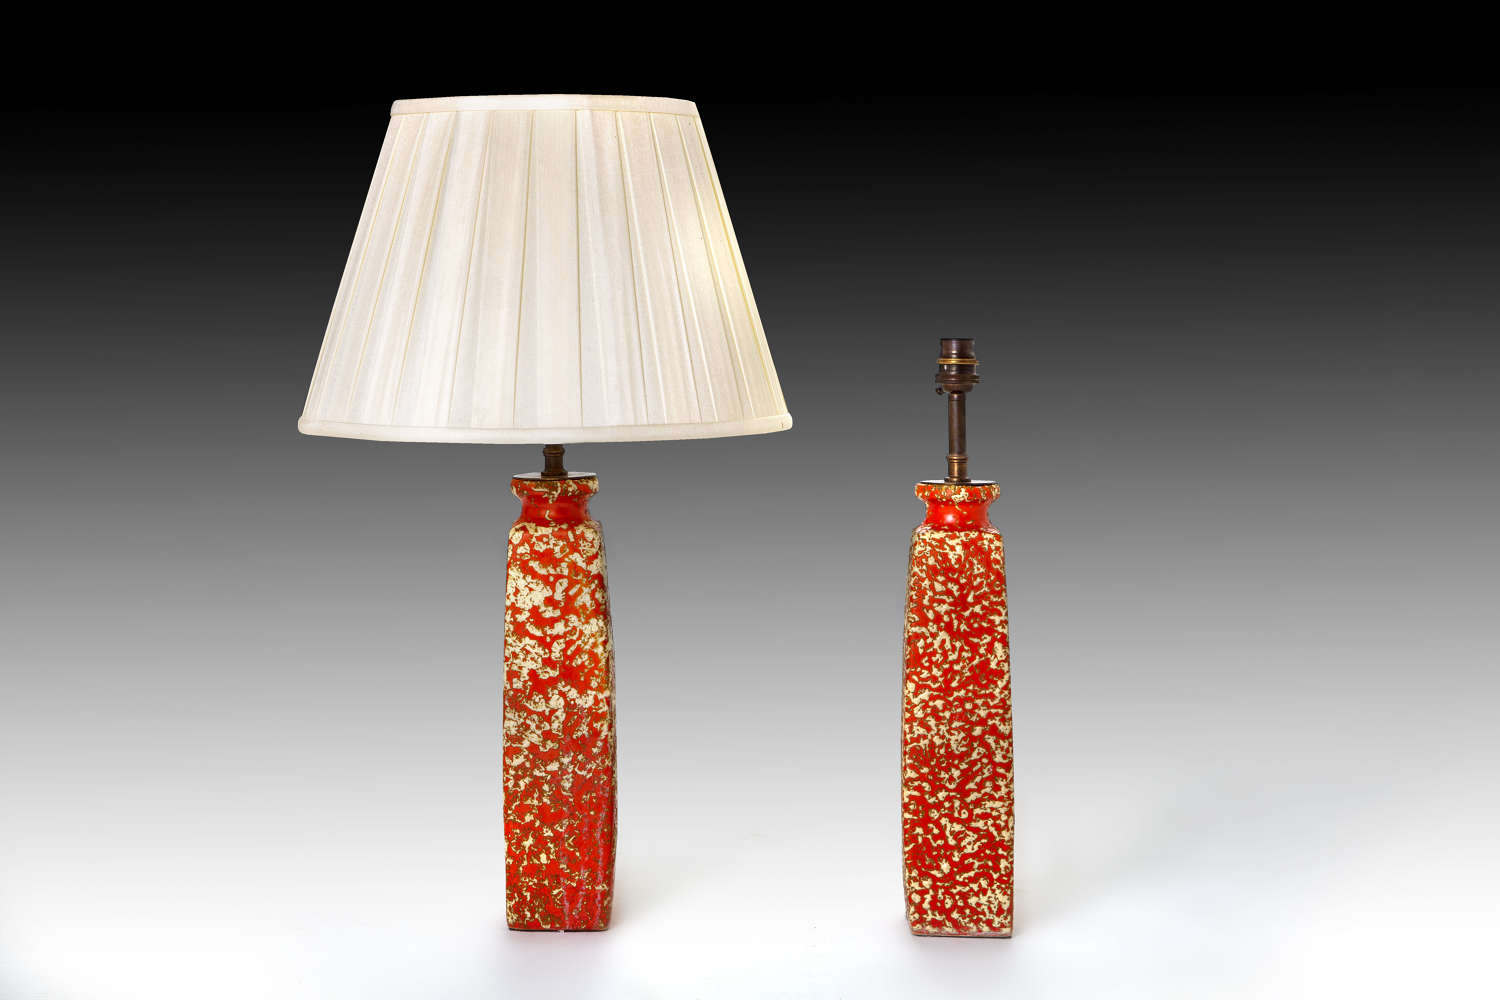 A pair of coral textured pottery lamps